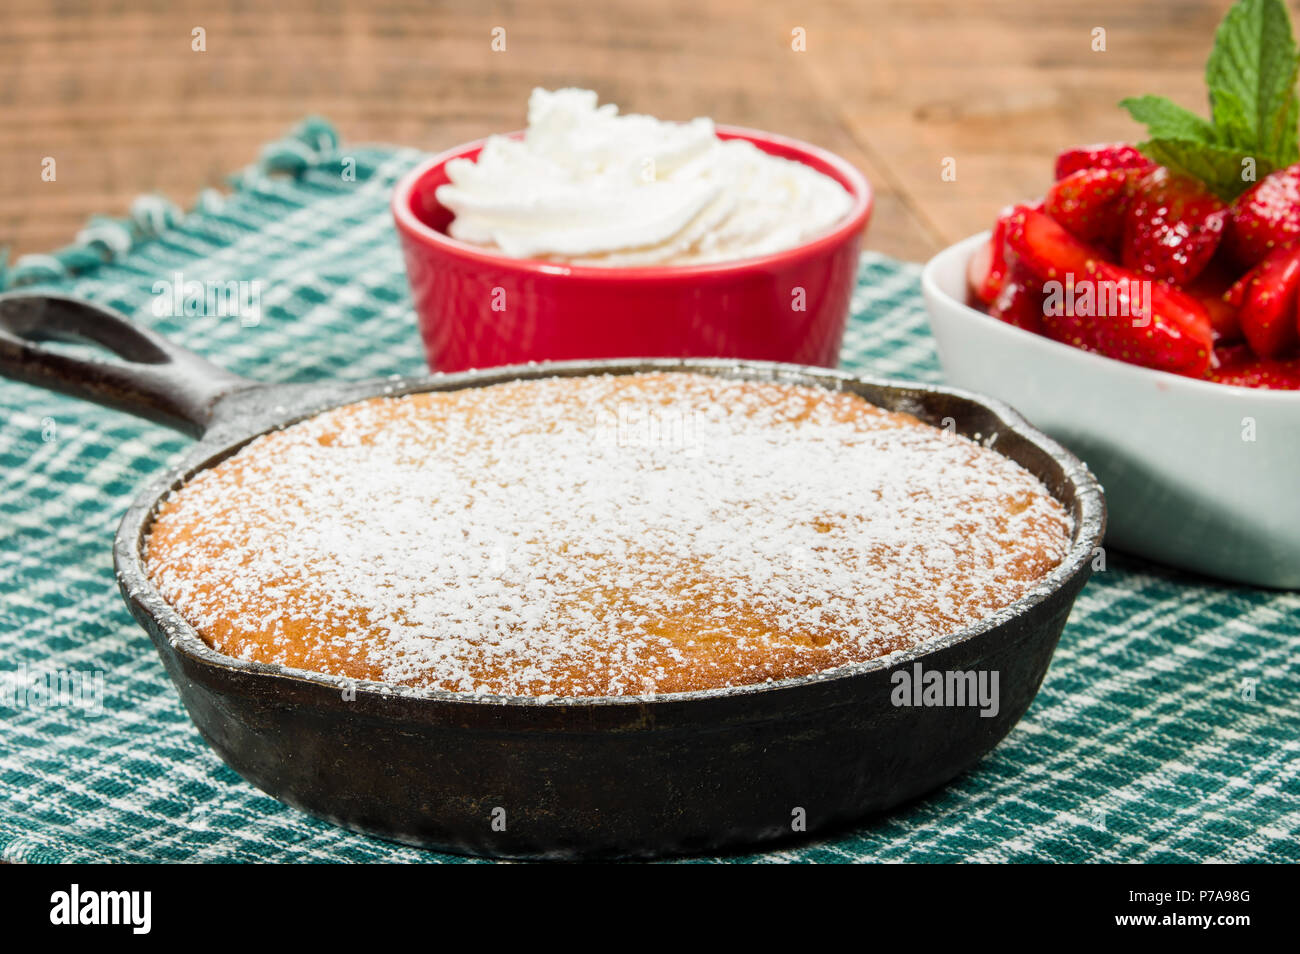 Cast iron skillet baked cake with bowl of red strawberries Stock Photo